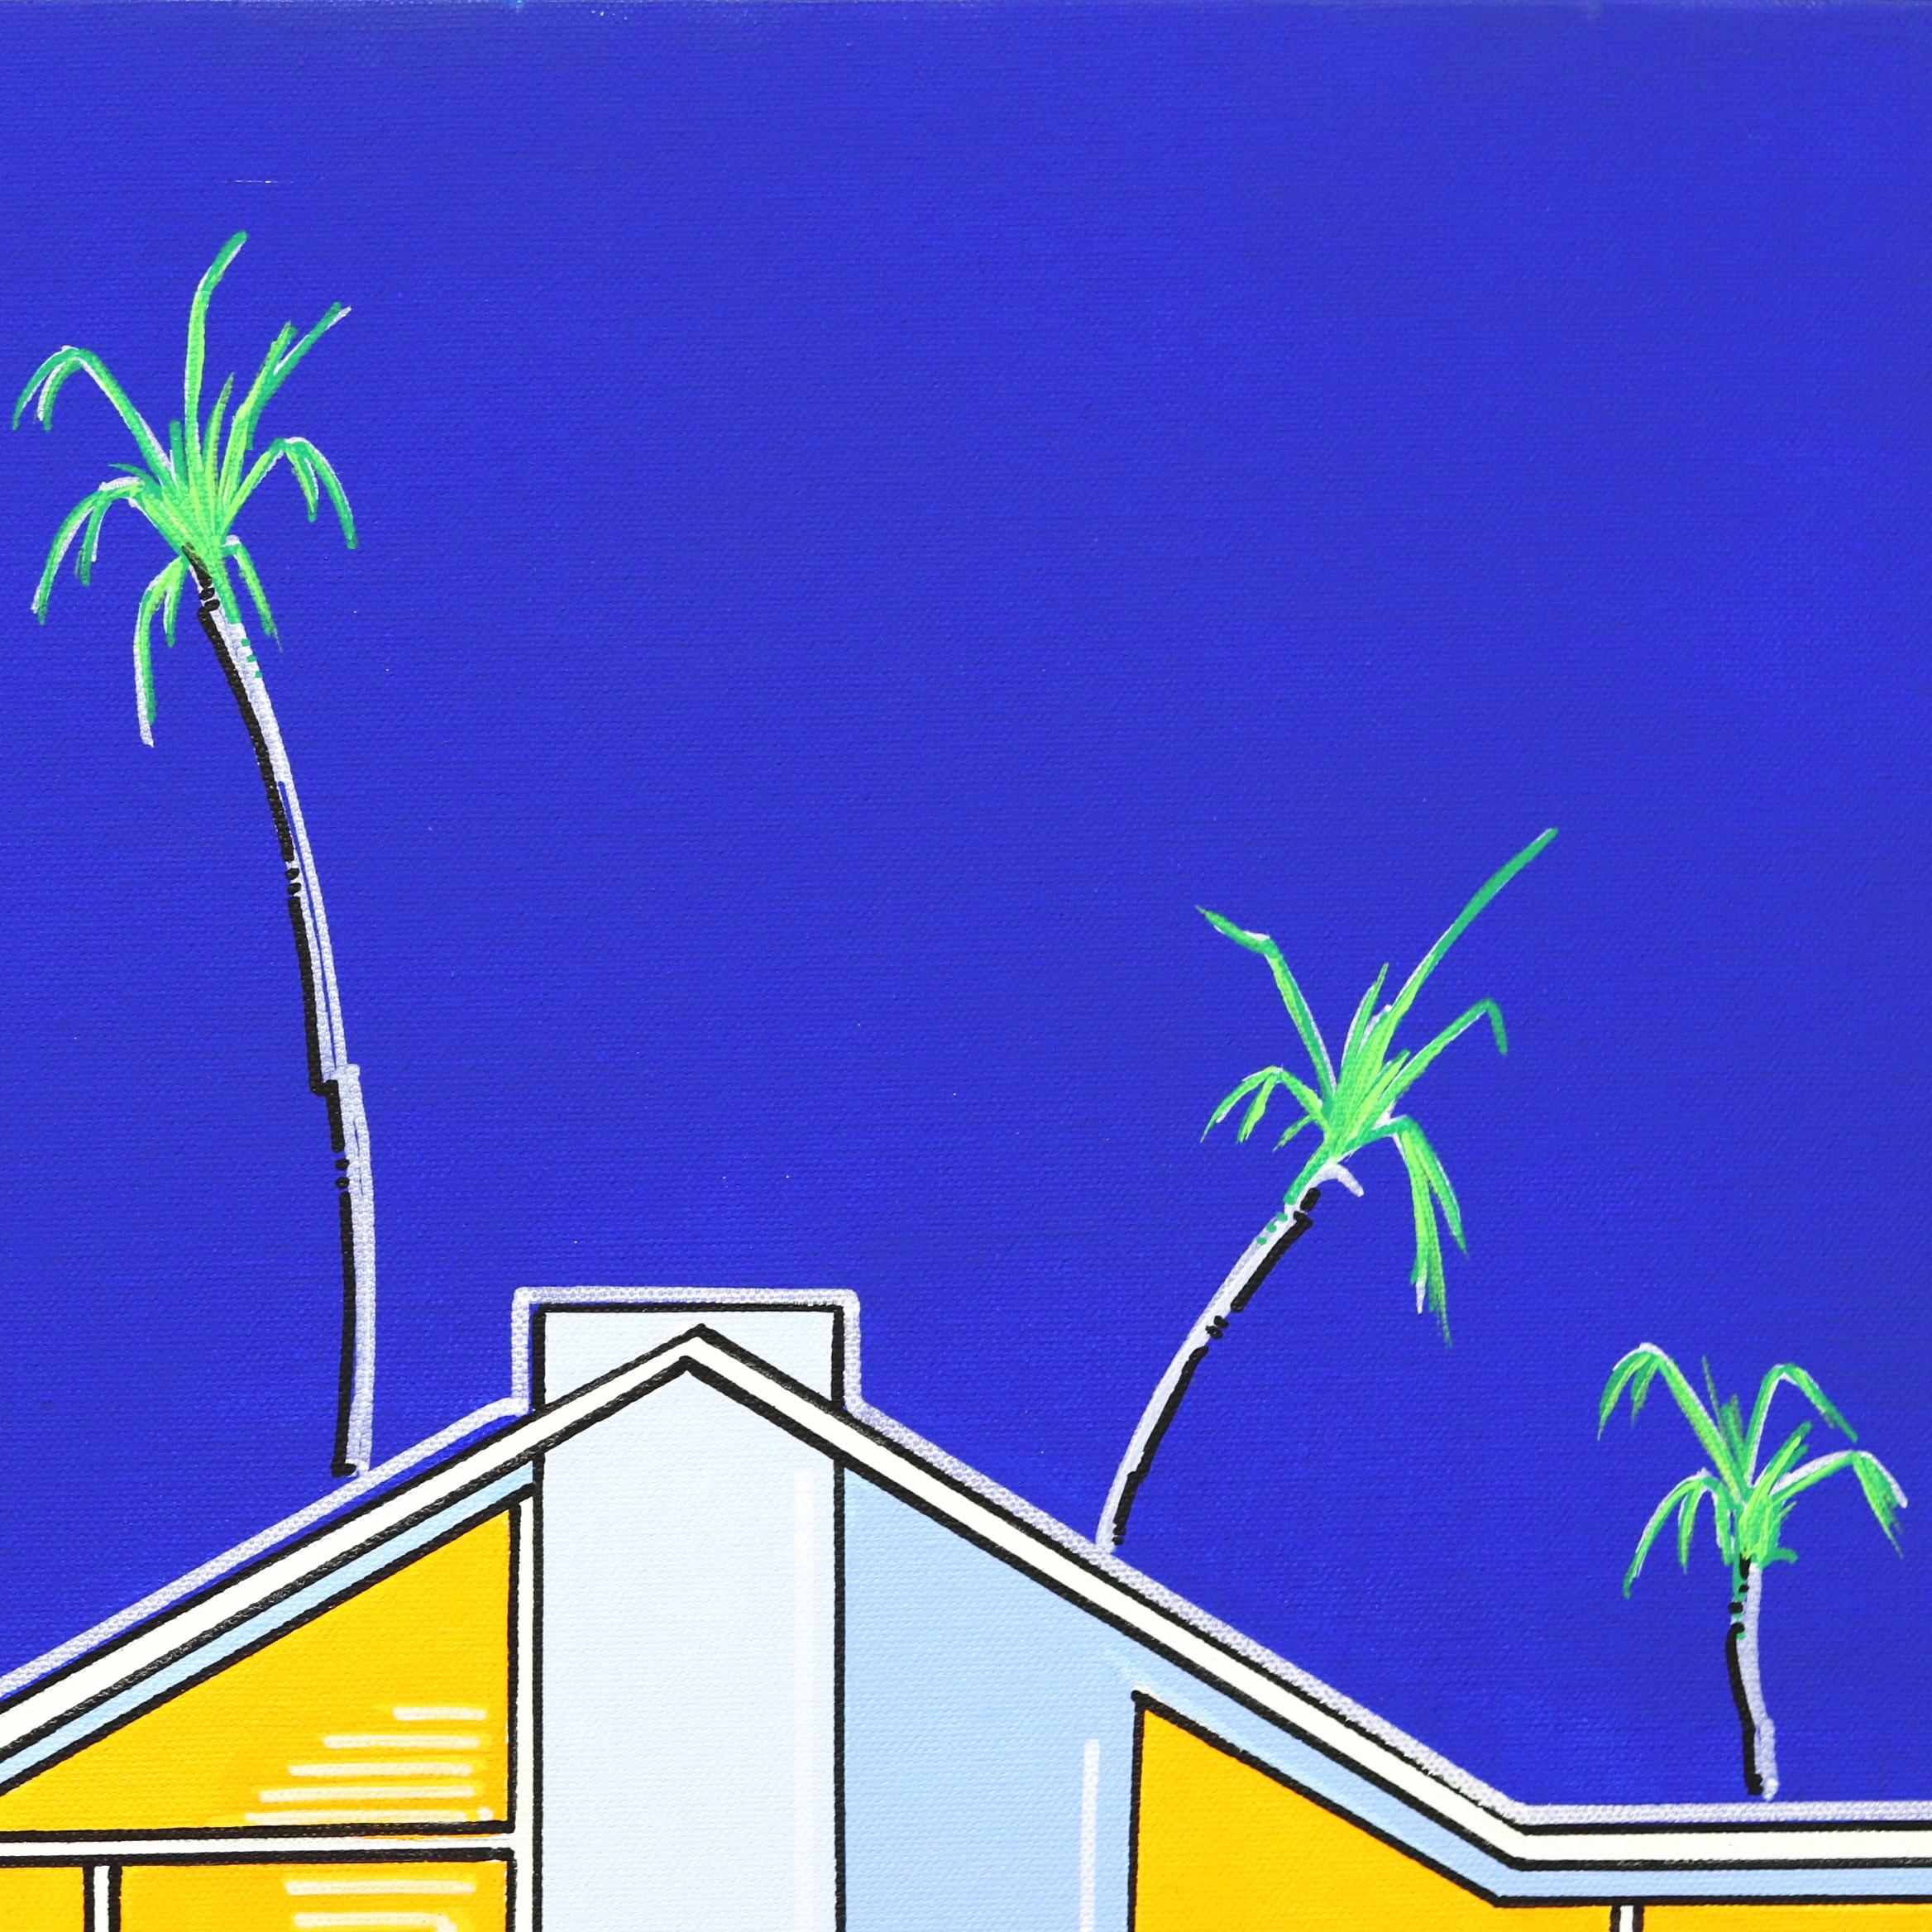 Summers 2 - Vibrant Blue and Yellow Original Modern Home and Pool Painting - Purple Interior Painting by Jonjo Elliott